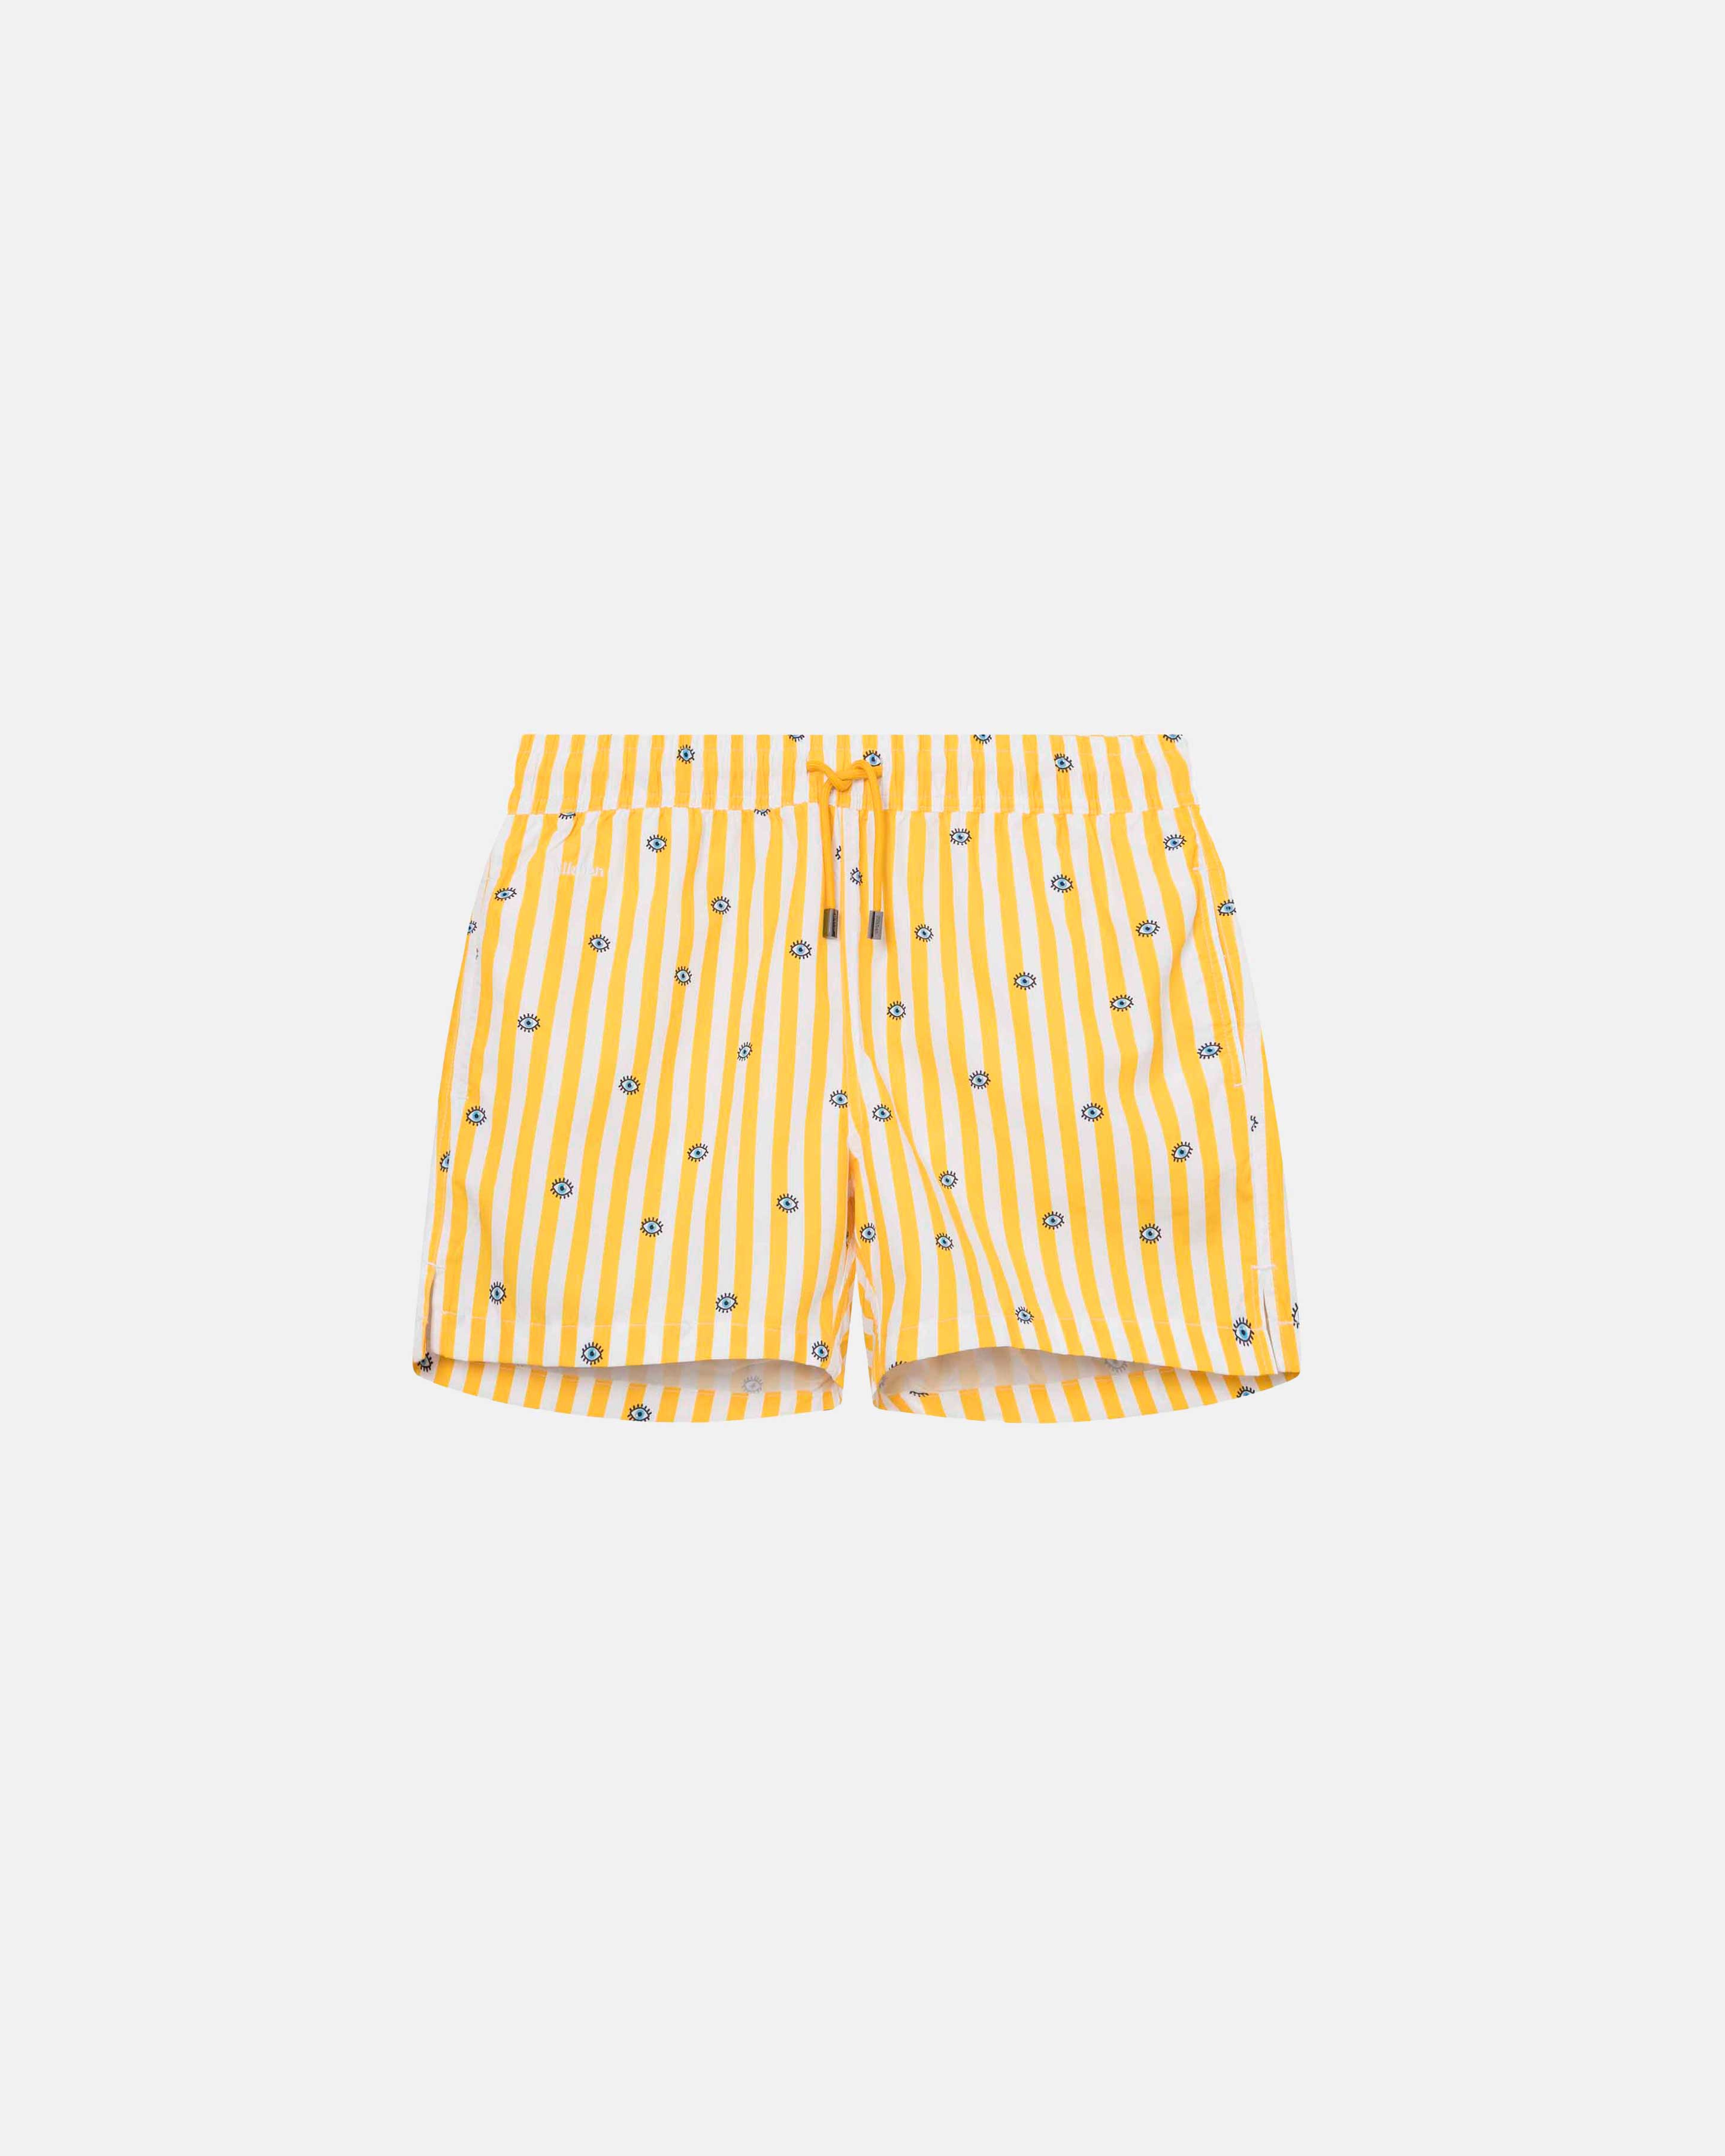 Yellow and white striped swim trunks. Mid length with drawstring and two side pockets.